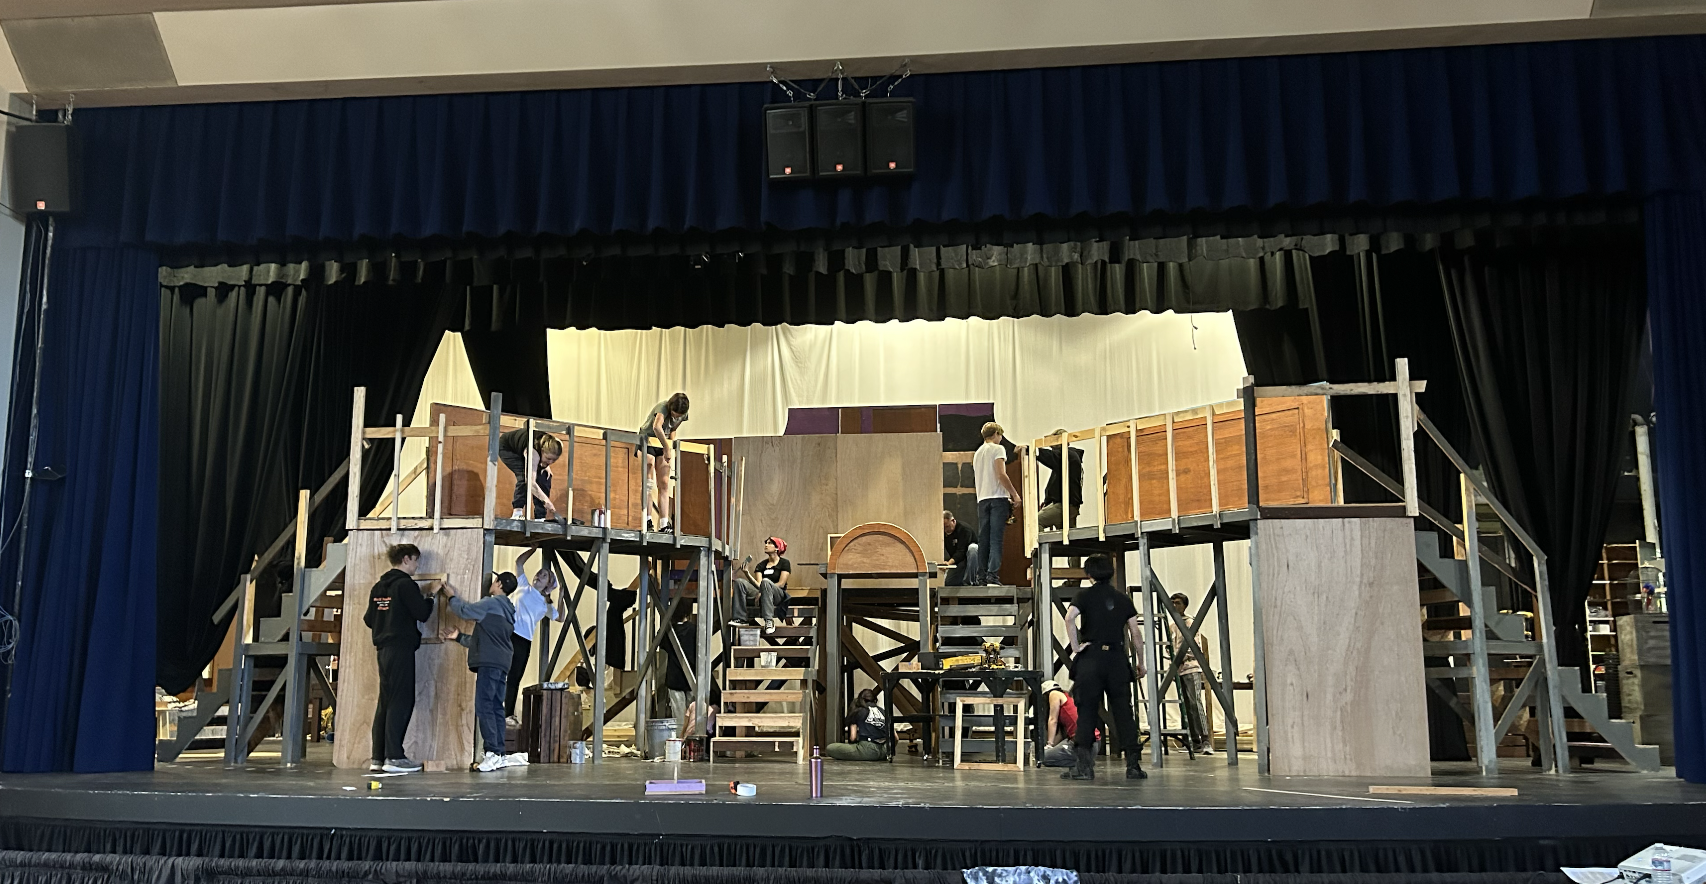 NDB students have been preparing for the play since August.